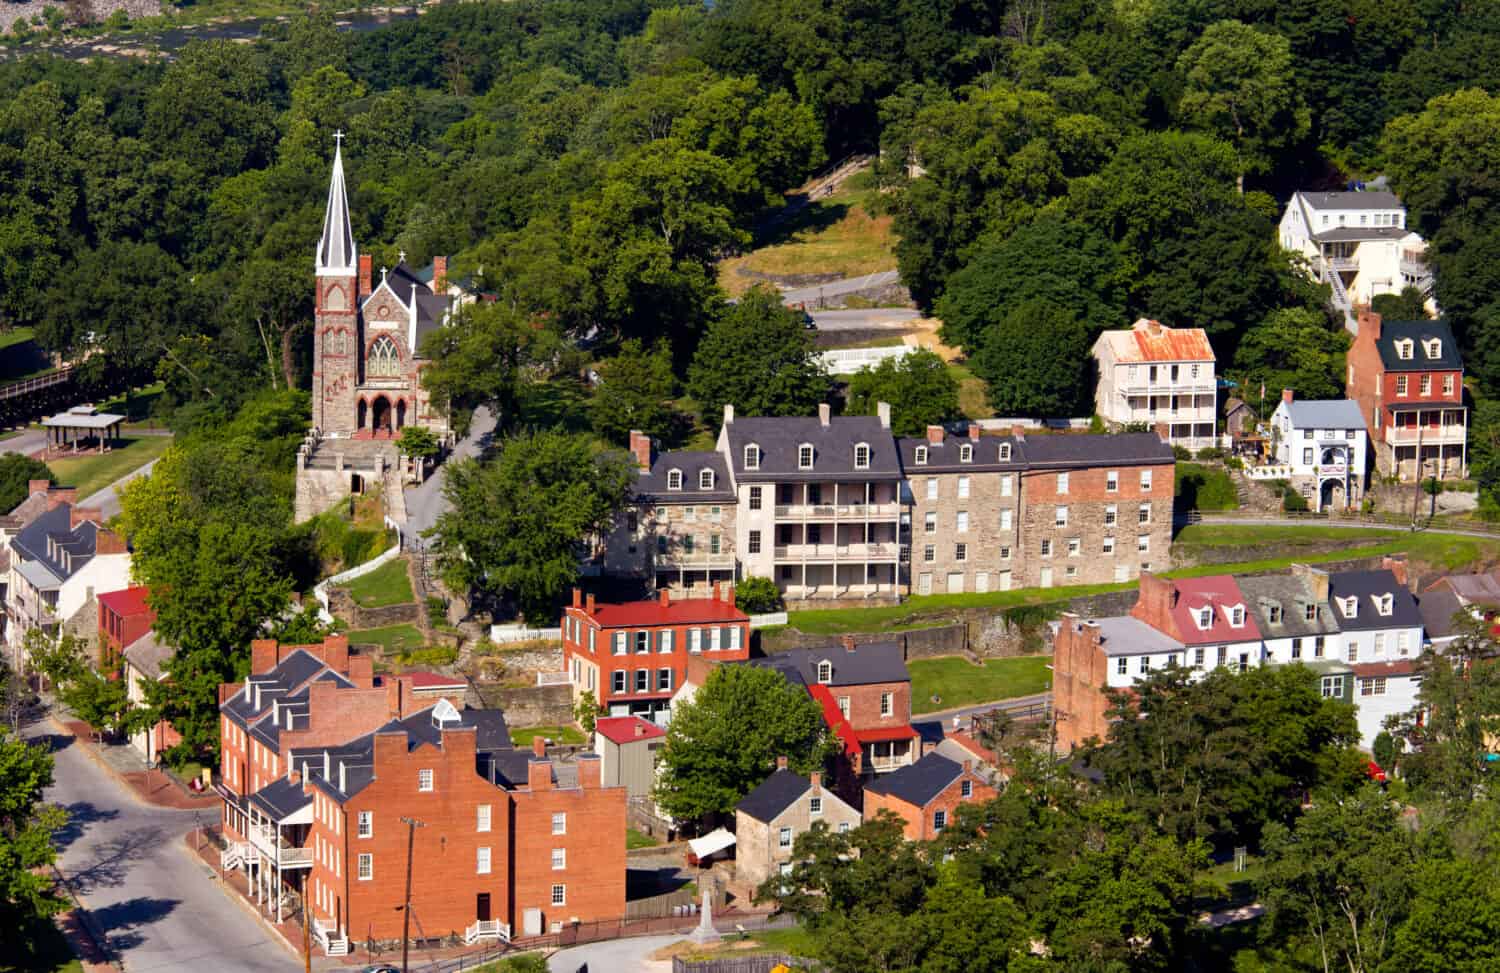 Aerial view over the National Park town of Harpers Ferry in West Virginia with the church and old buildings in the city